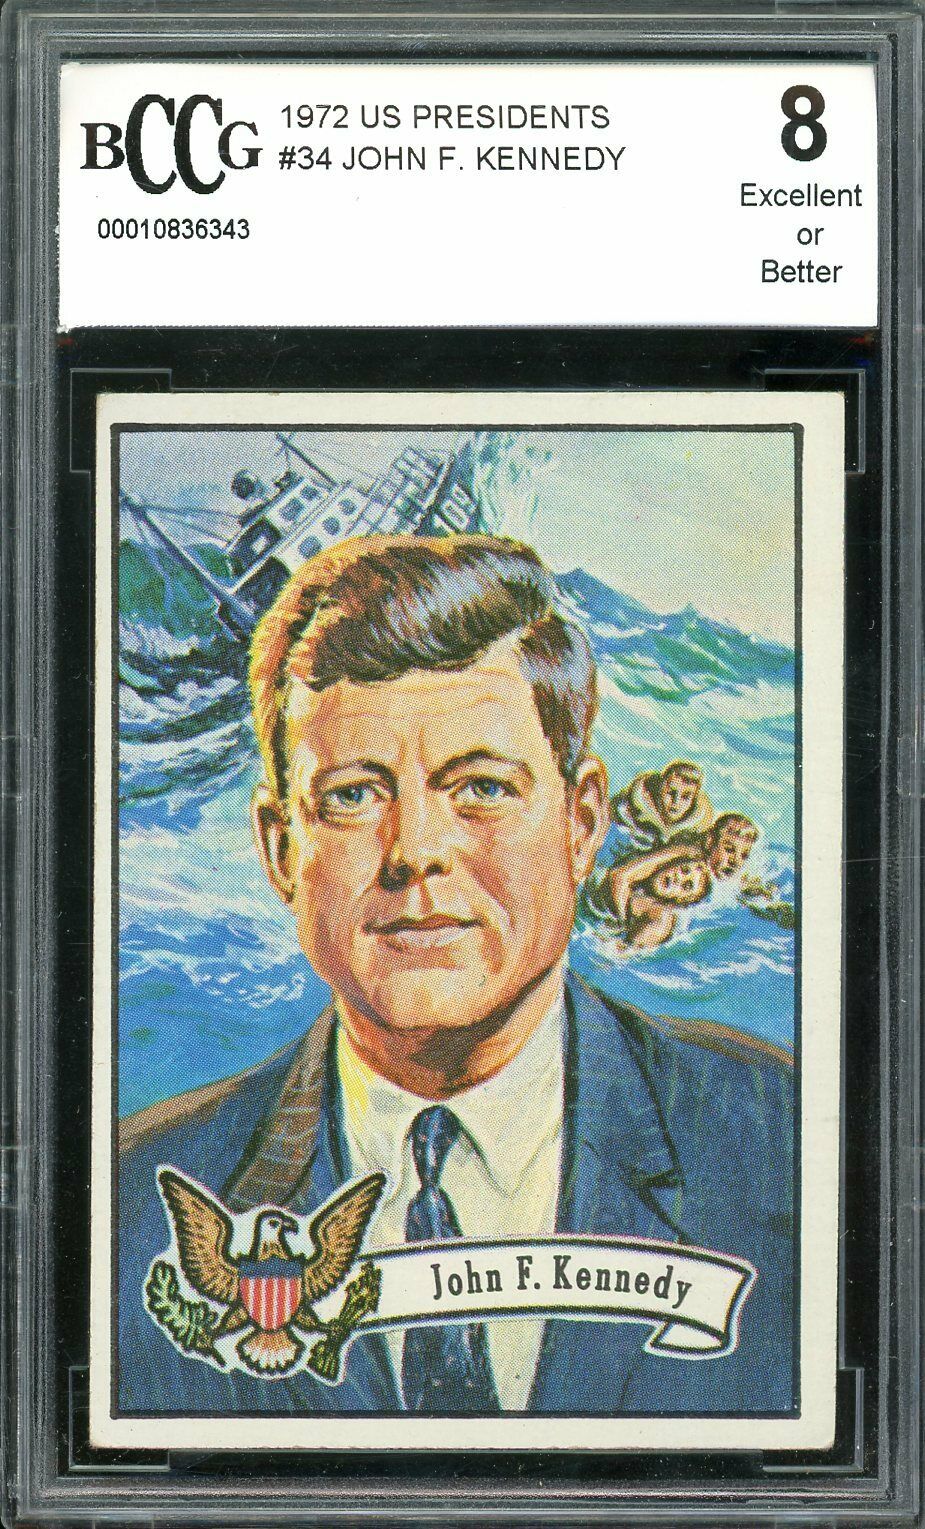 1972 US Presidents #34 John Kennedy Card BGS BCCG 8 Excellent+ Image 1